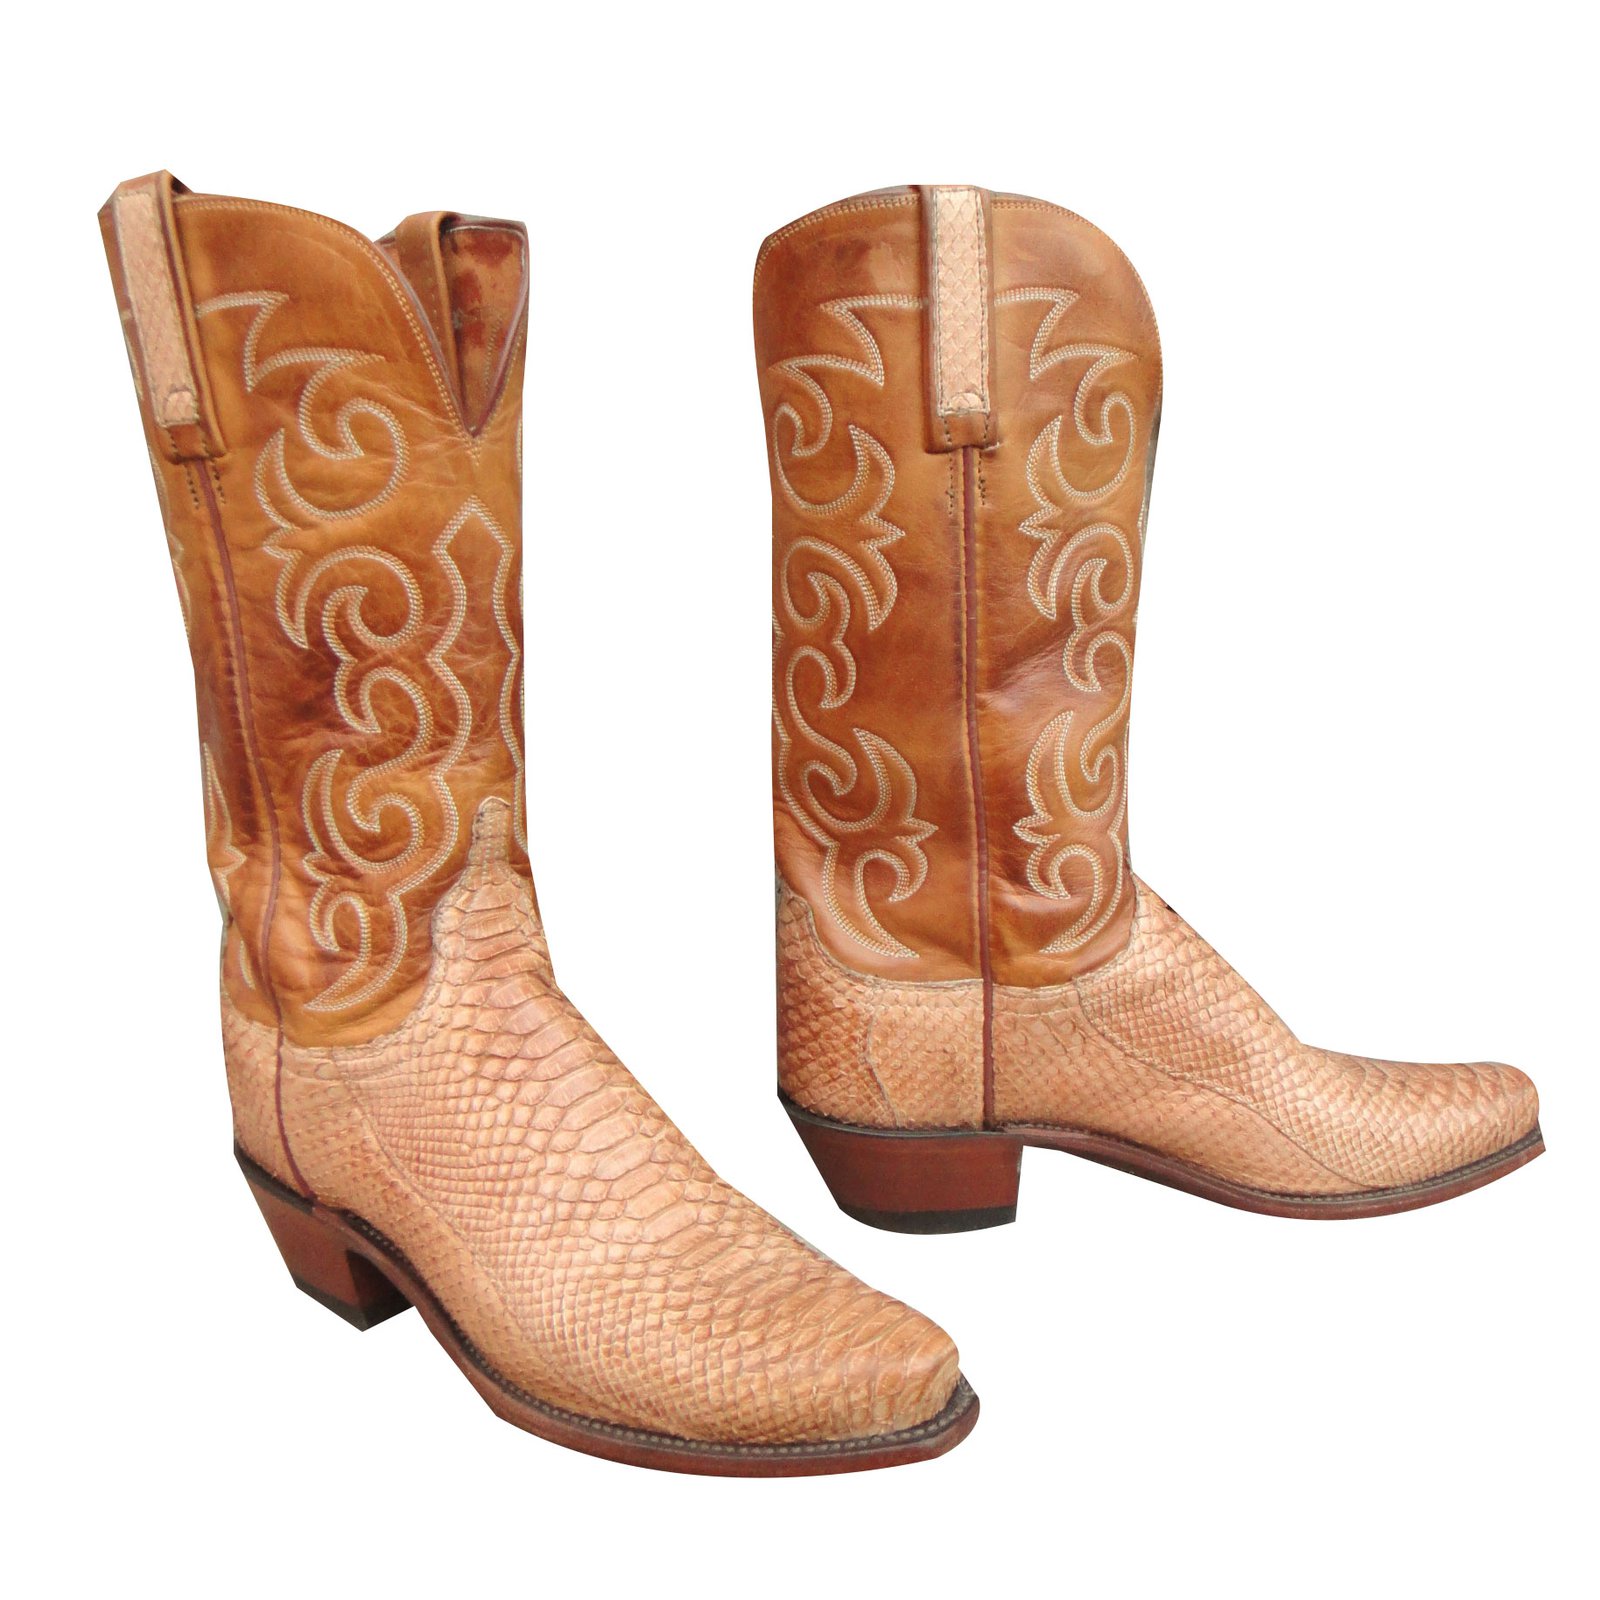 lucchese python boots